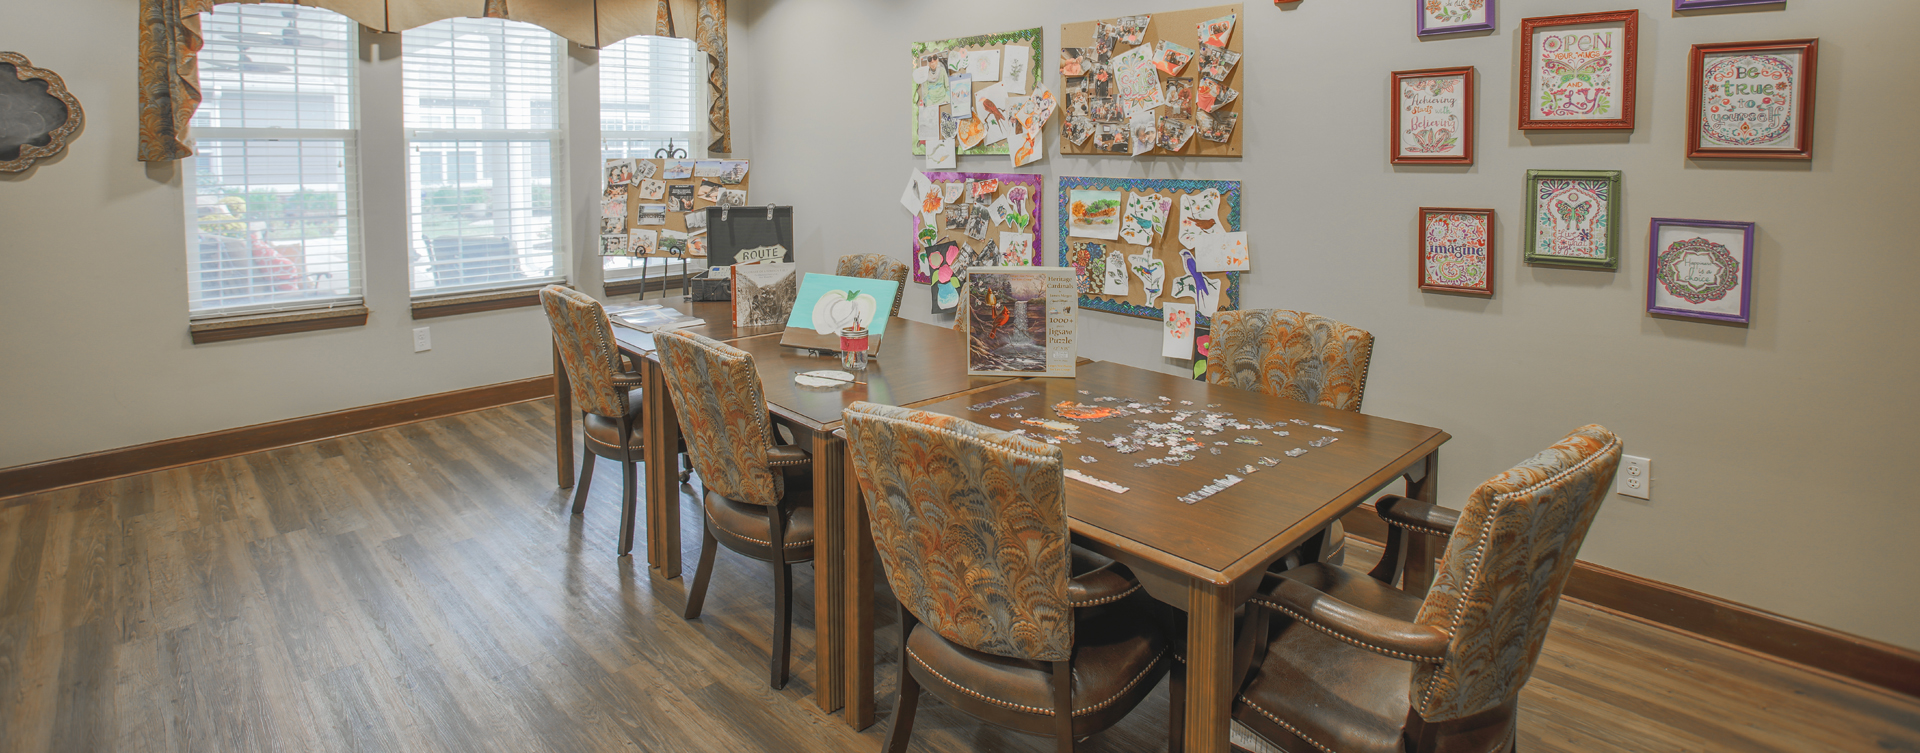 Unleash your creative side in the activity room at Bickford of Carmel